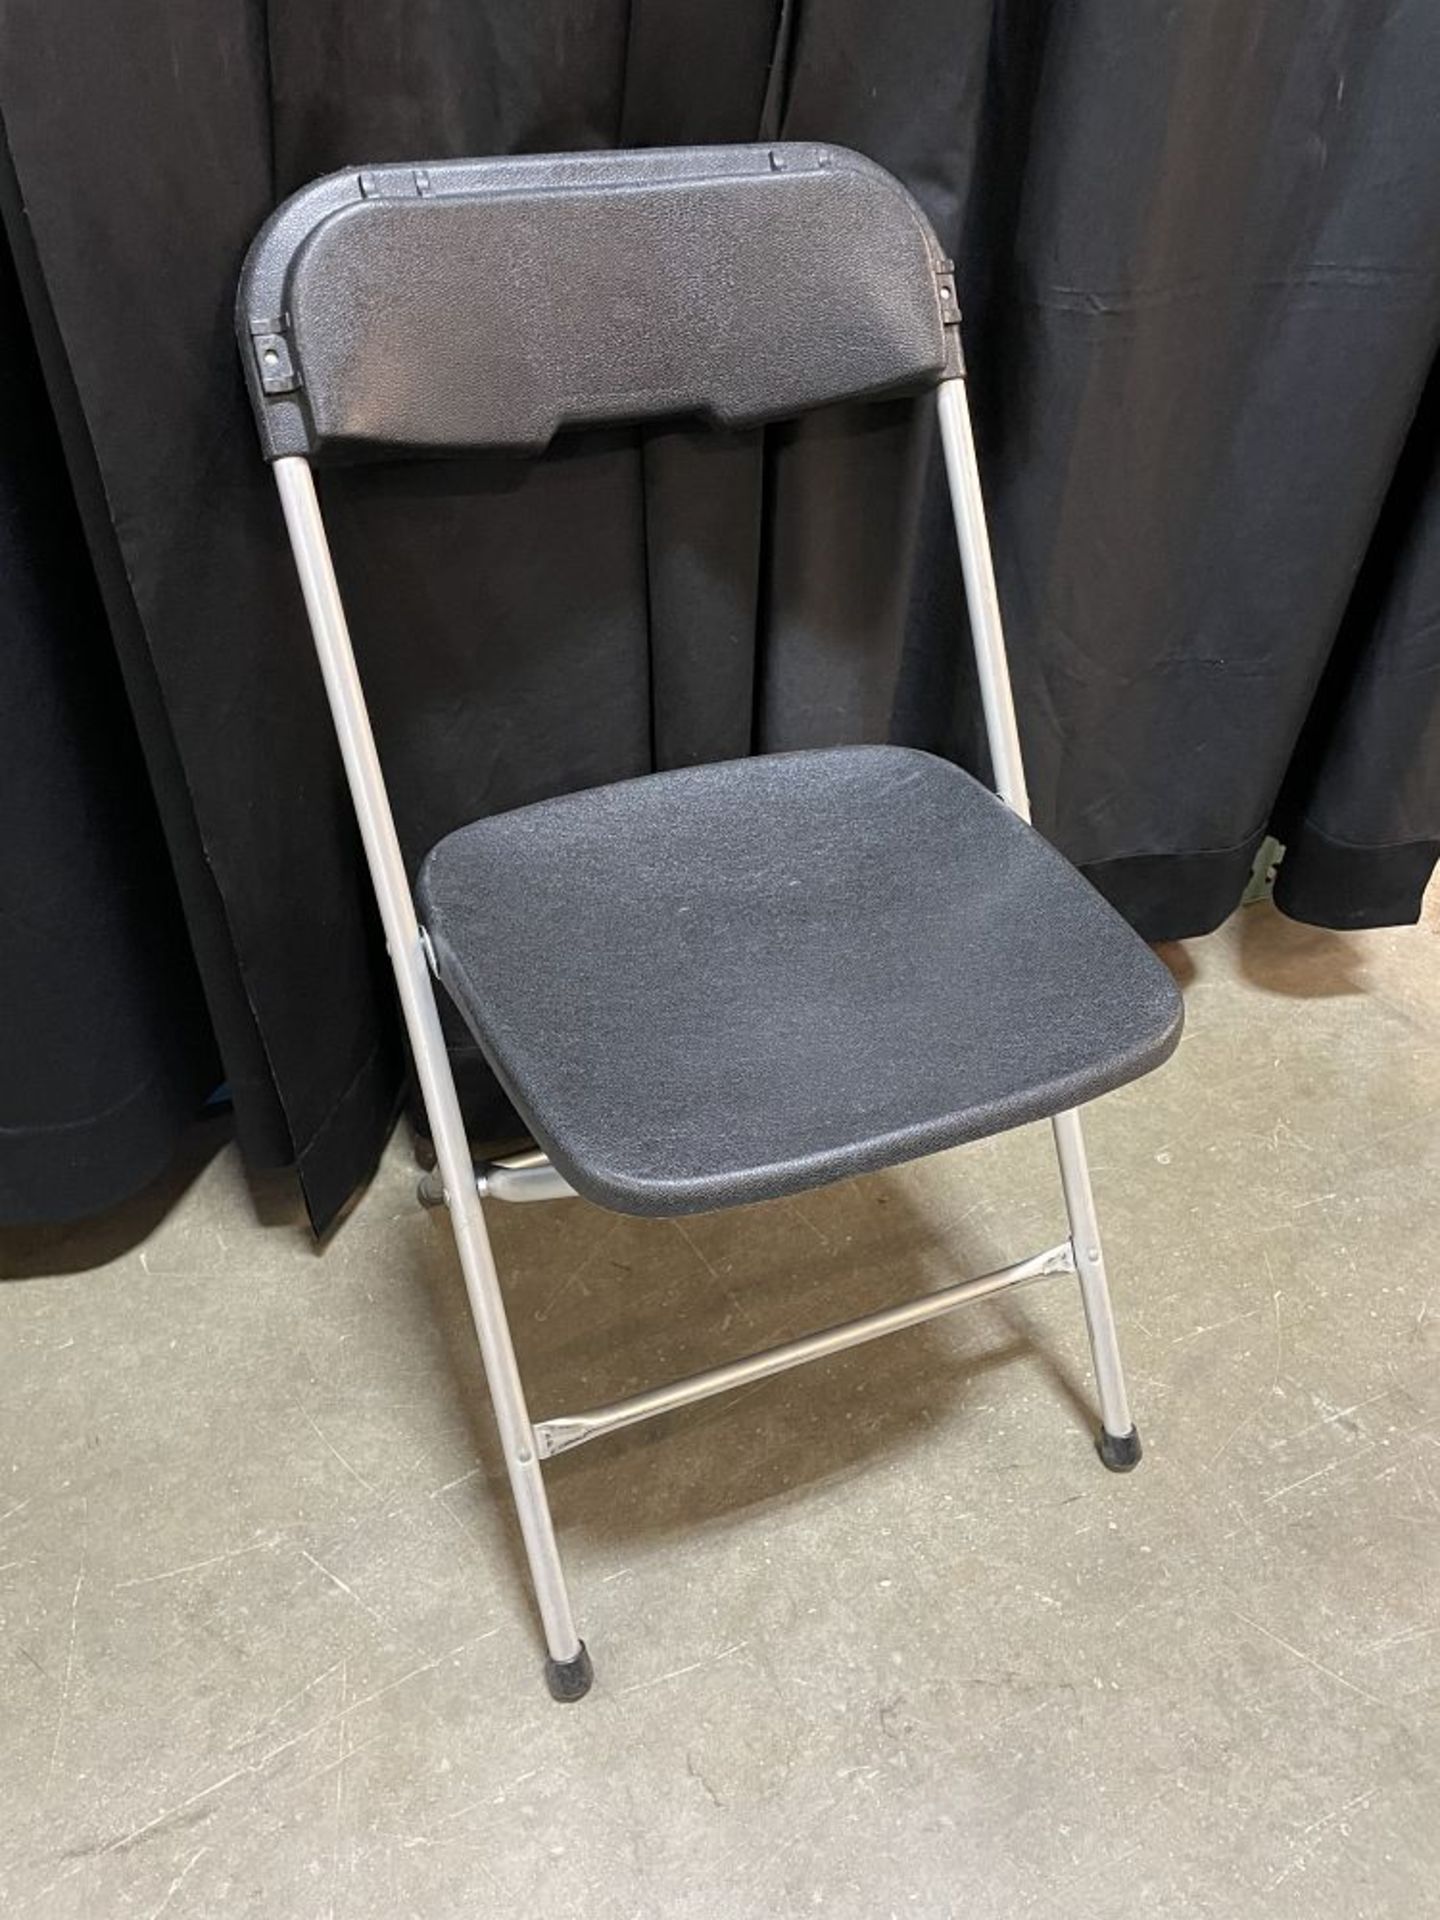 BLACK ALLOY CHAIR- ON 4 FLAT CARTS, BILLED SEPERATELY AT $10 A CART